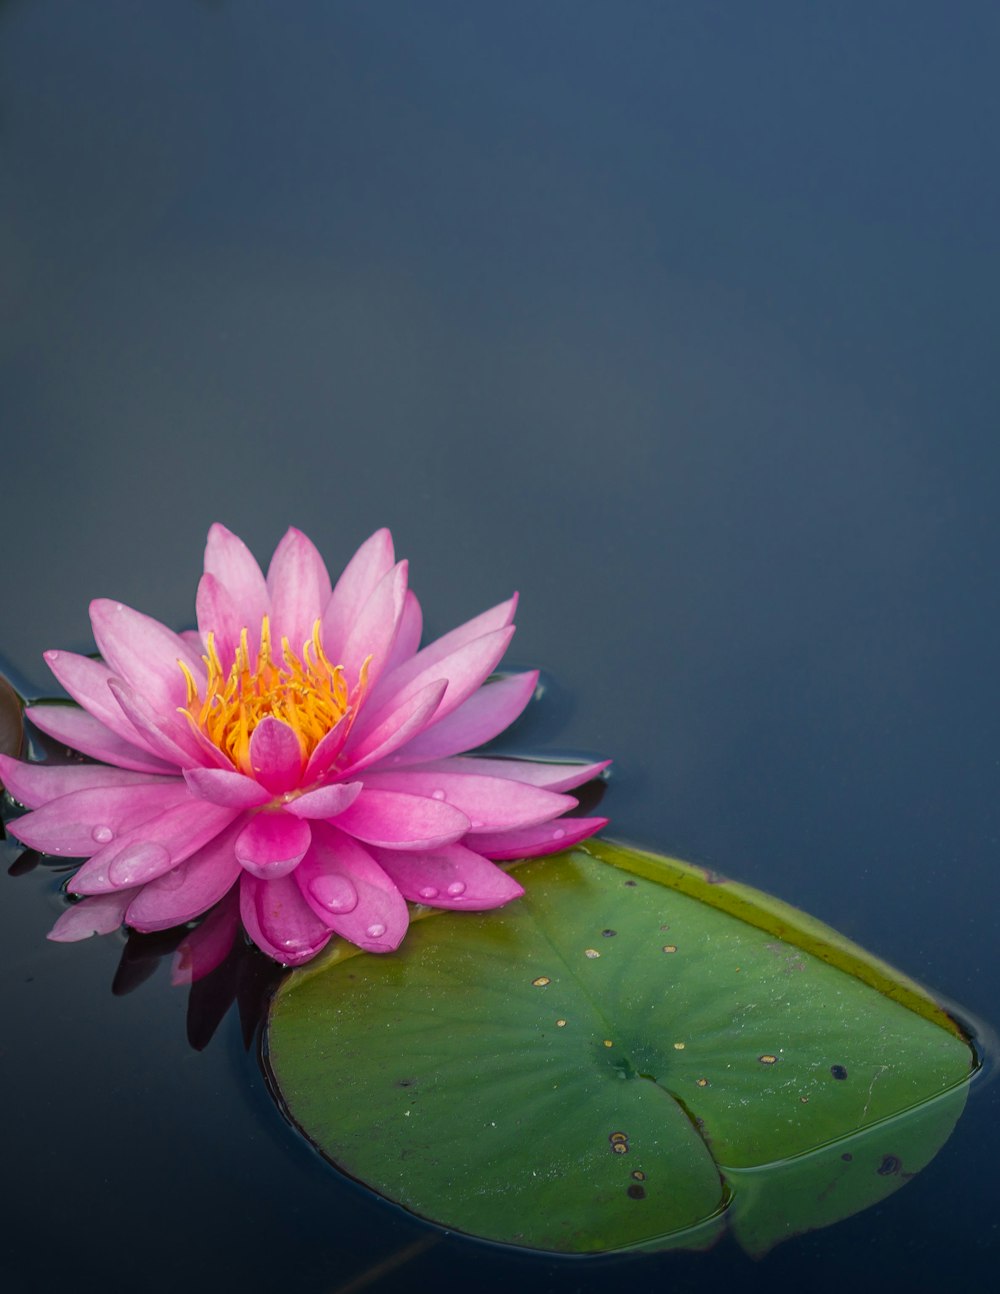 100+ Lotus Flower Pictures | Download